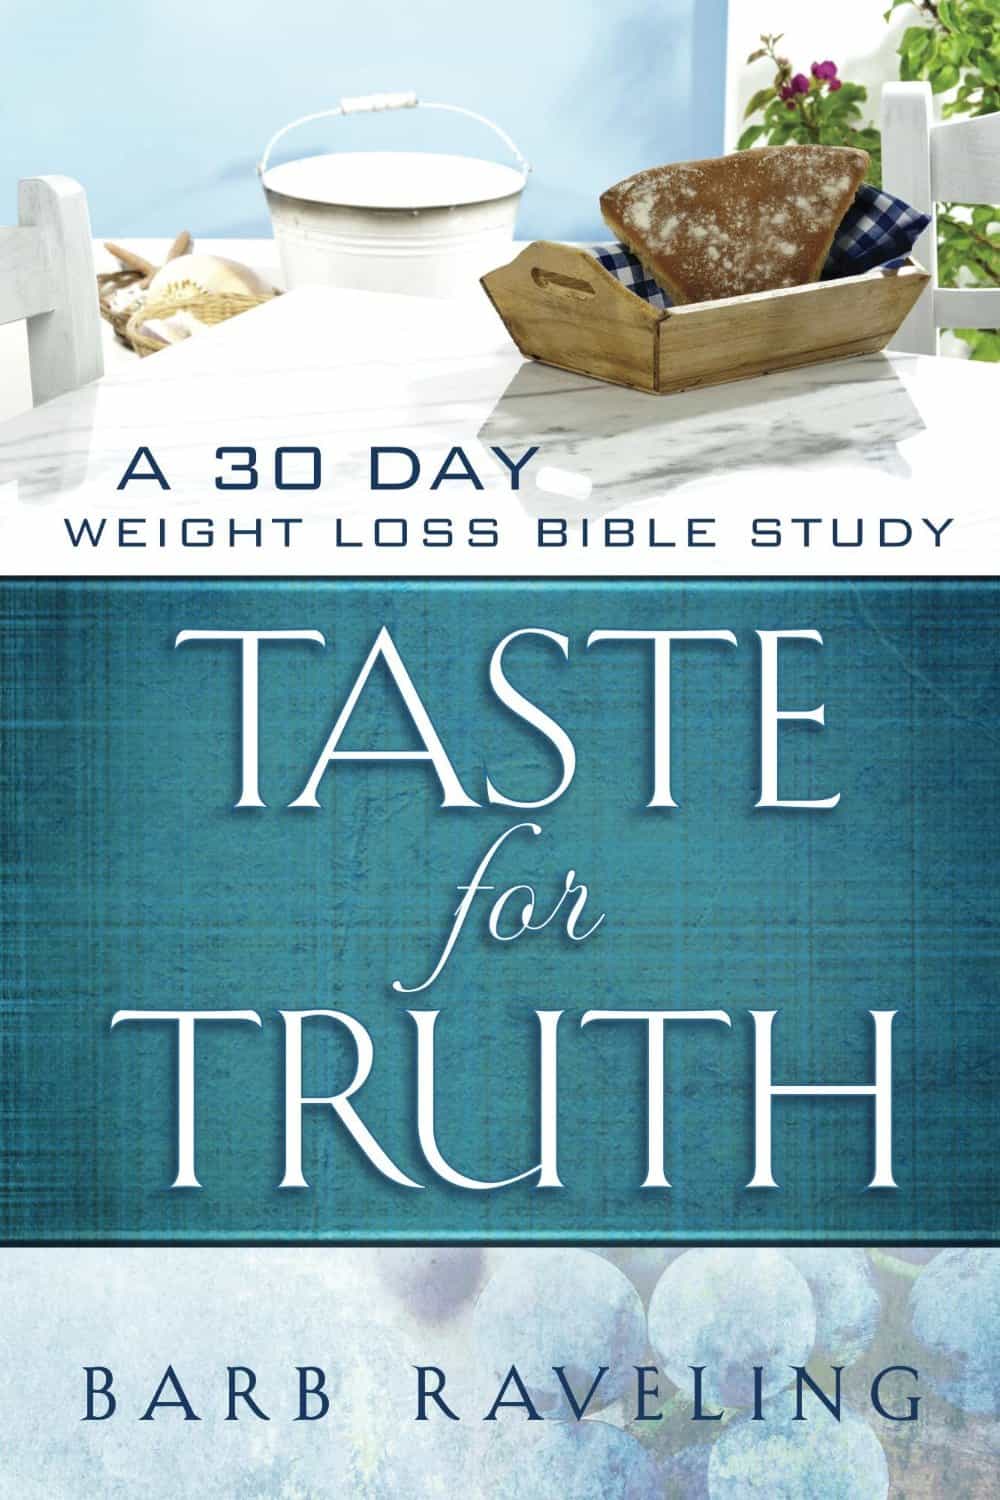 “Taste for Truth” by Barb Raveling